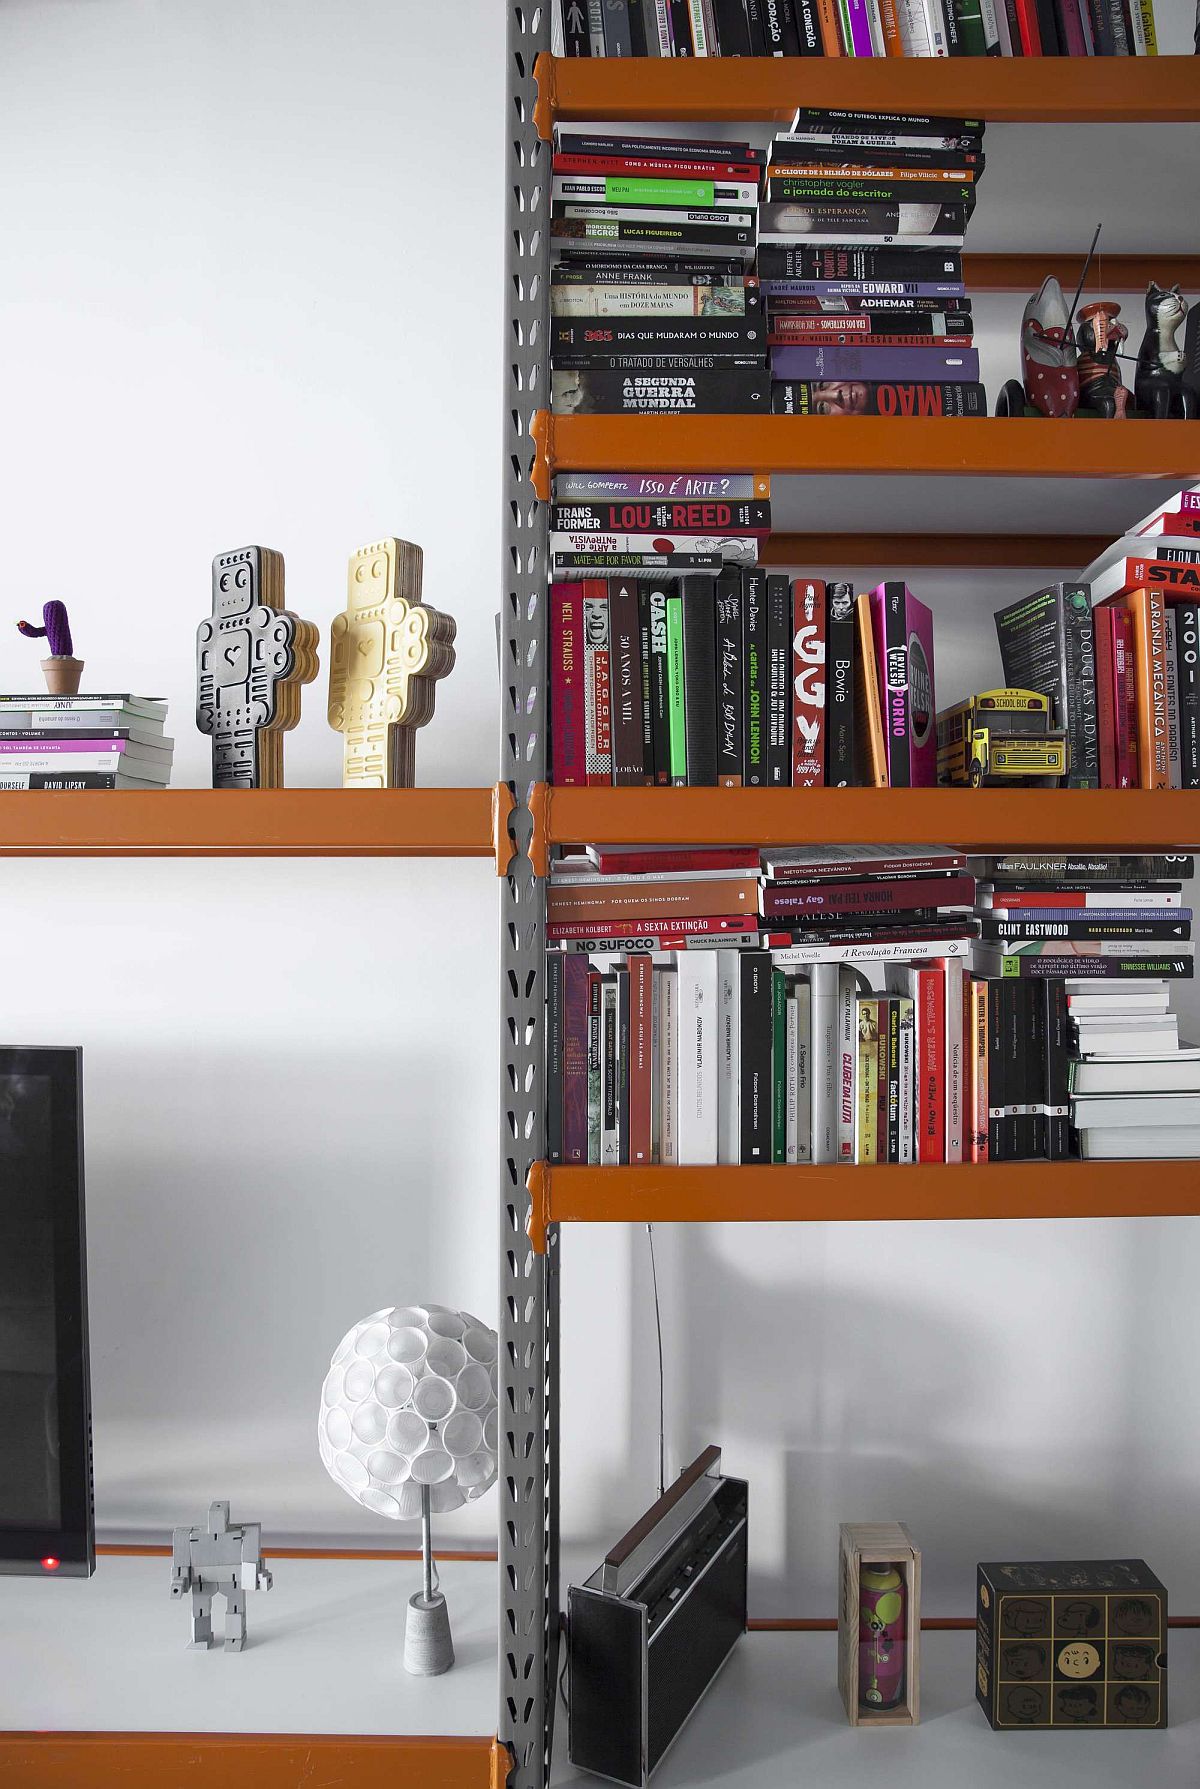 Snazzy bookshelf adds color to the interior